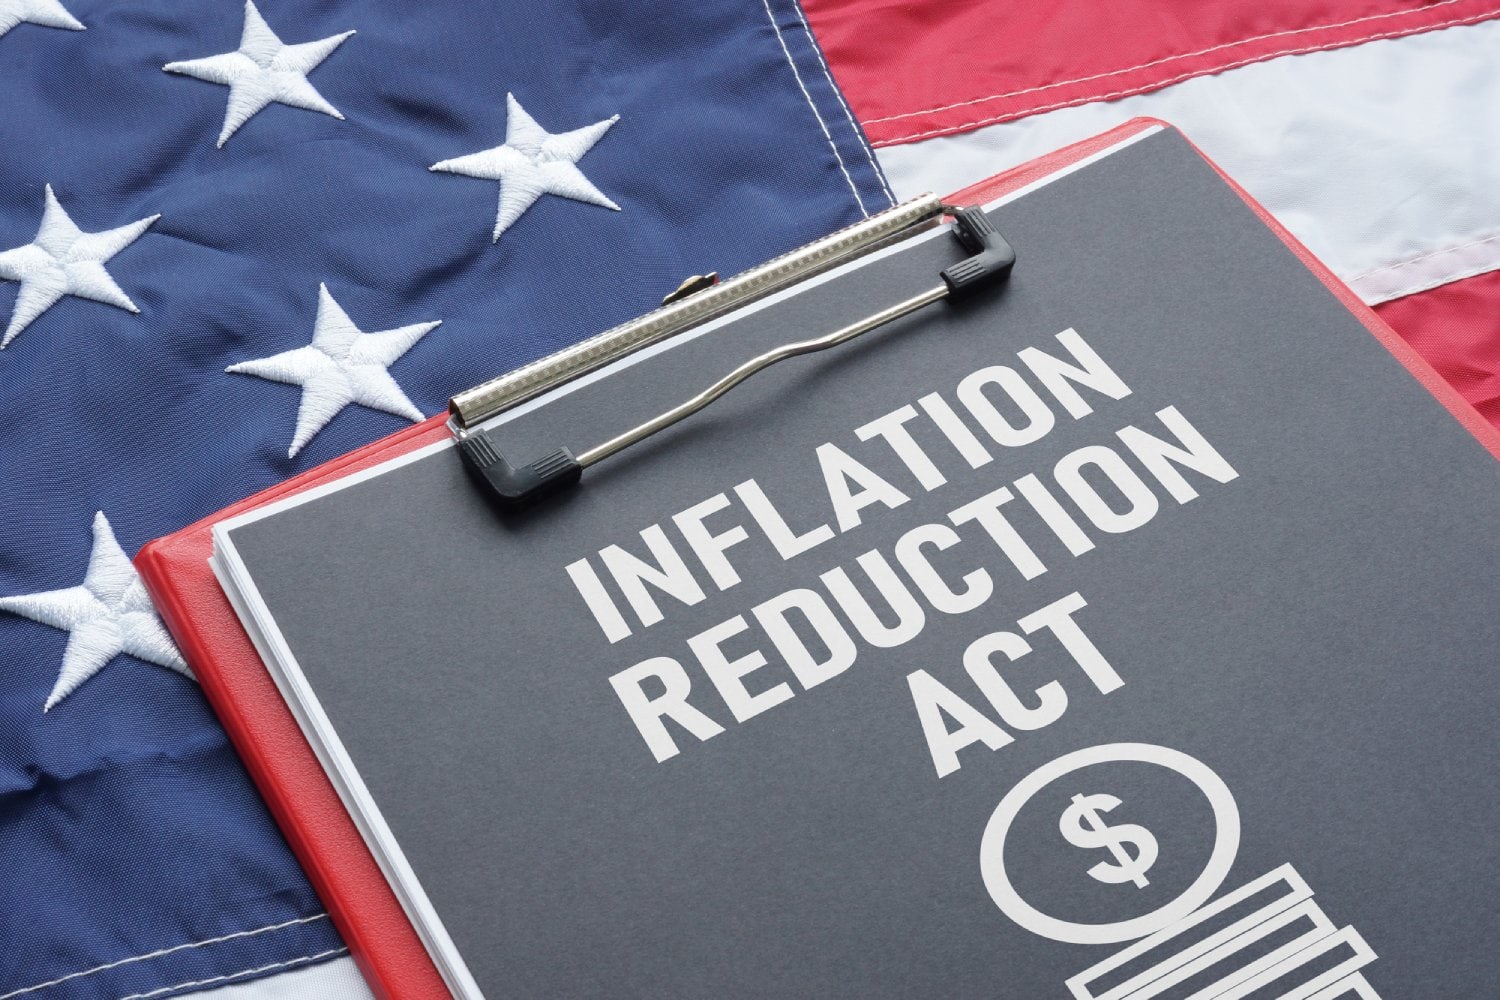 inflation-reduction-act-health-insurance-broker